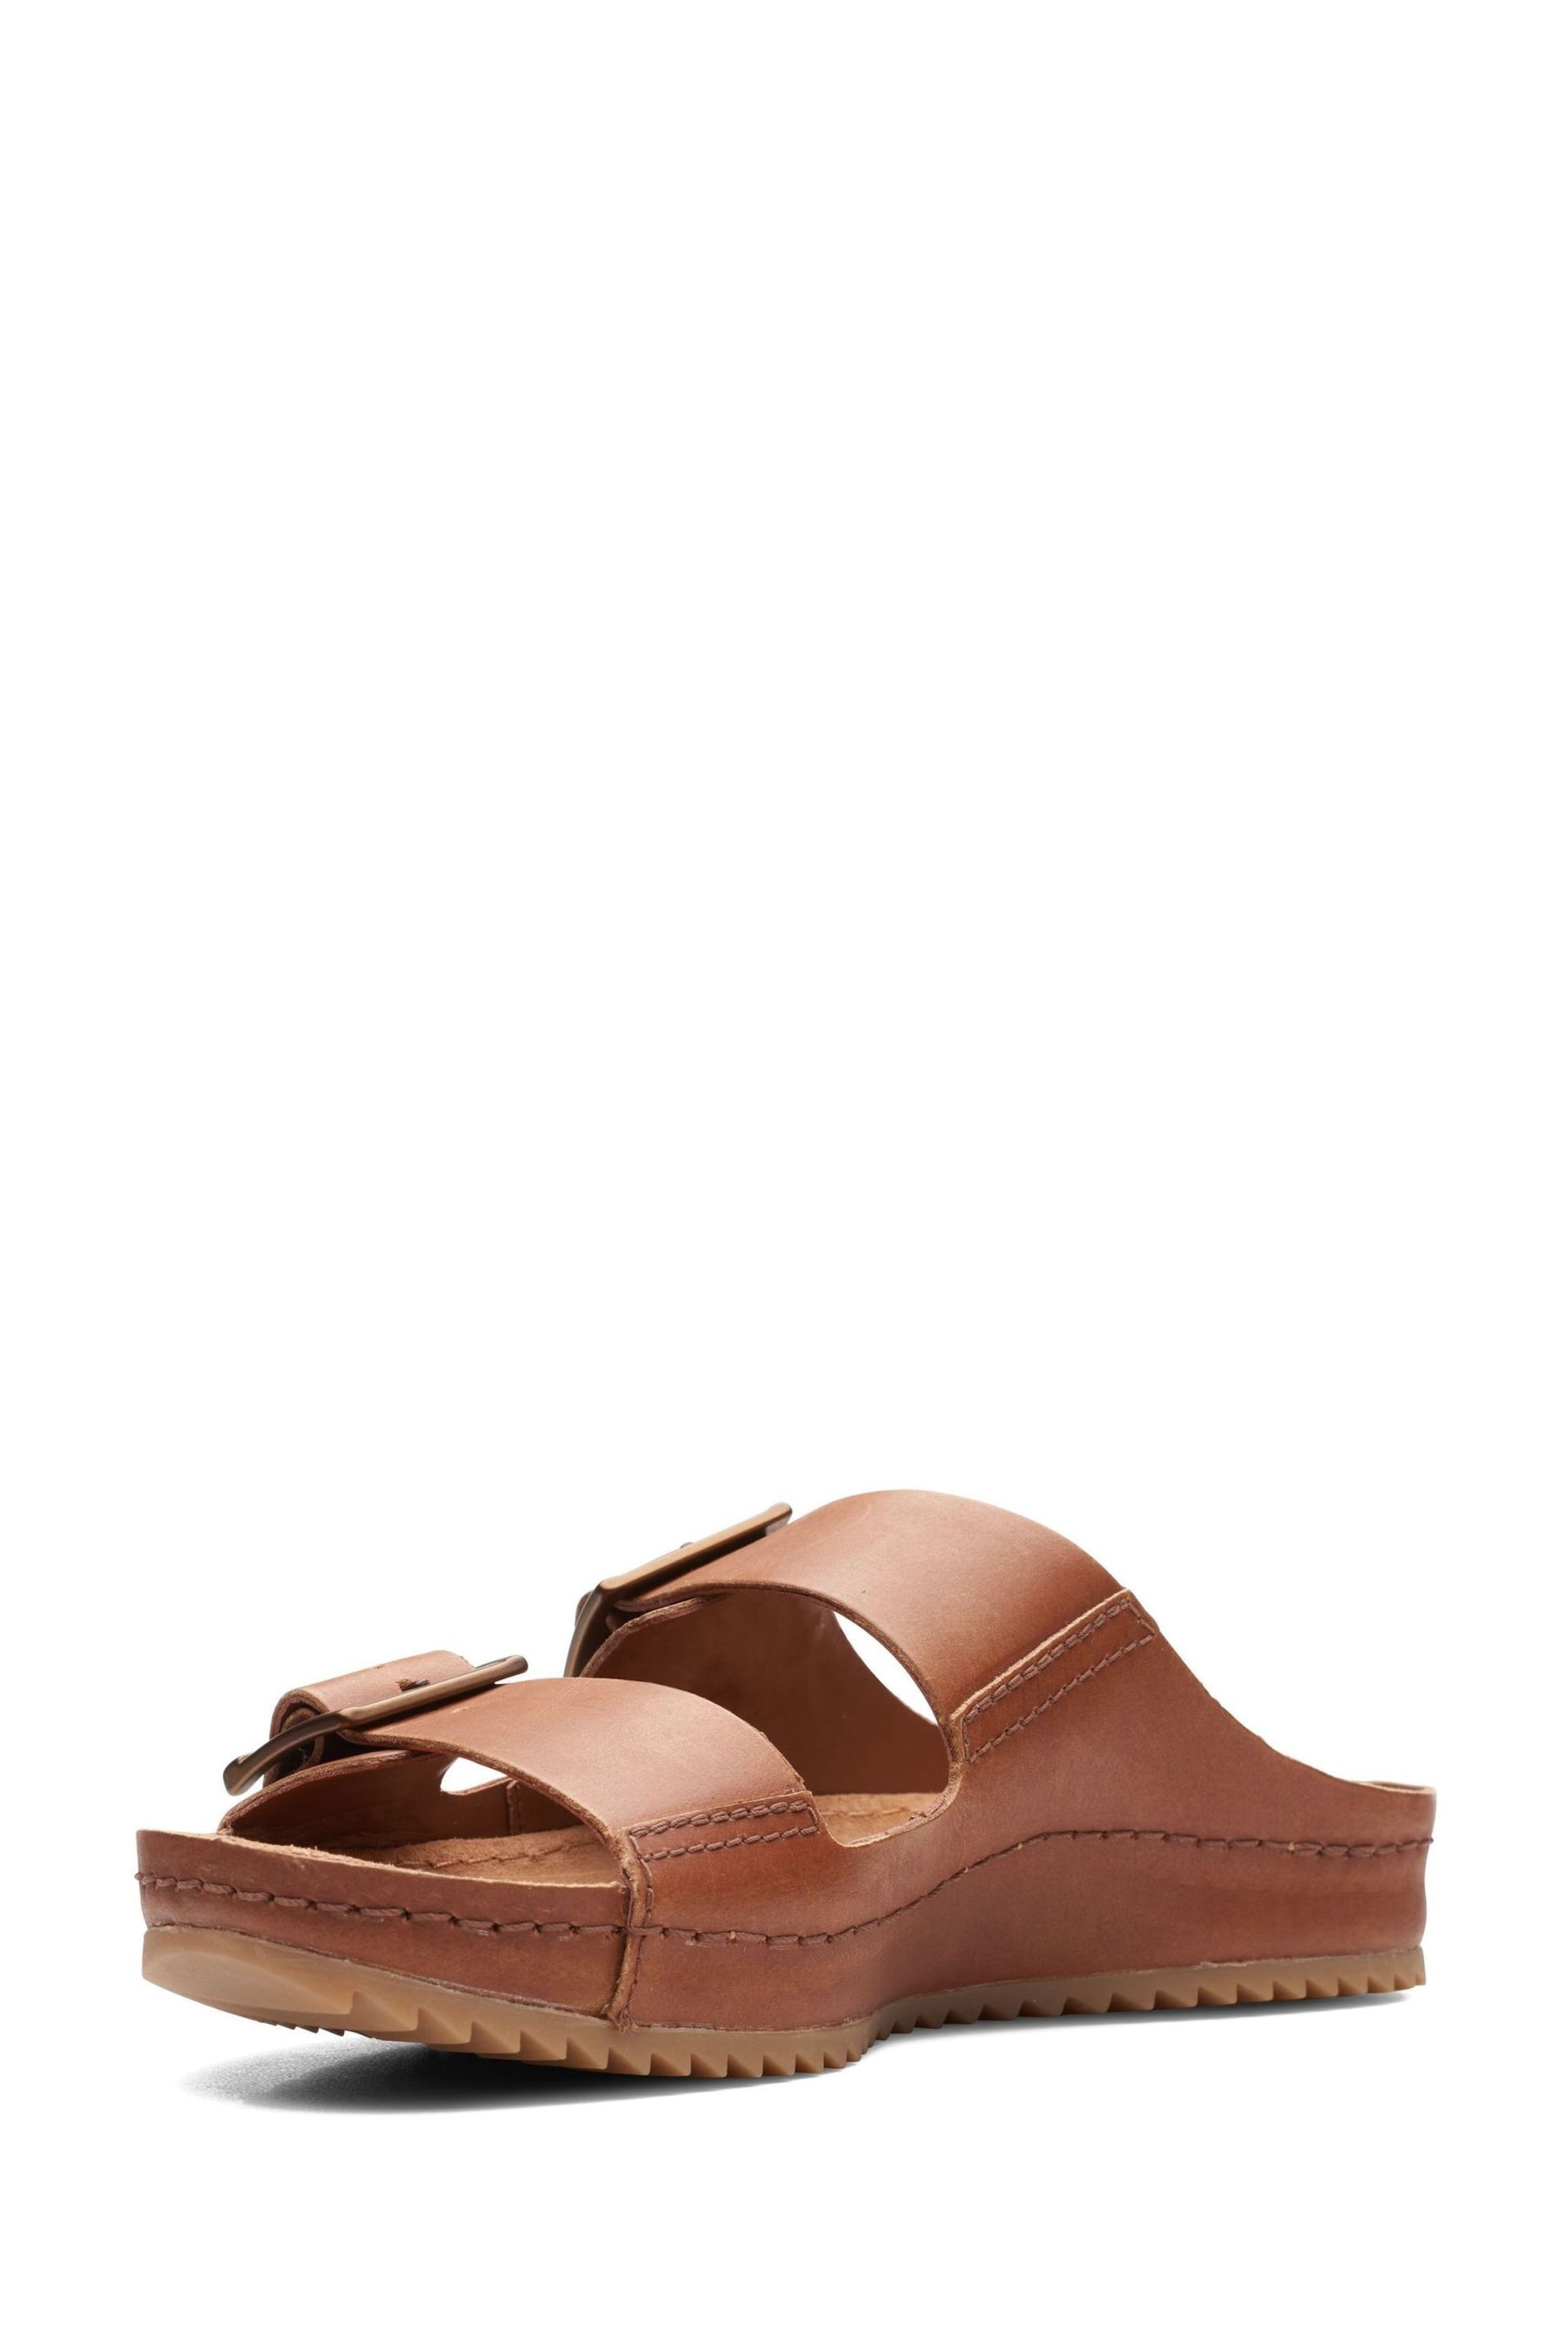 Clarks Natural Leather Brookleigh Sun Sandals - Image 4 of 7